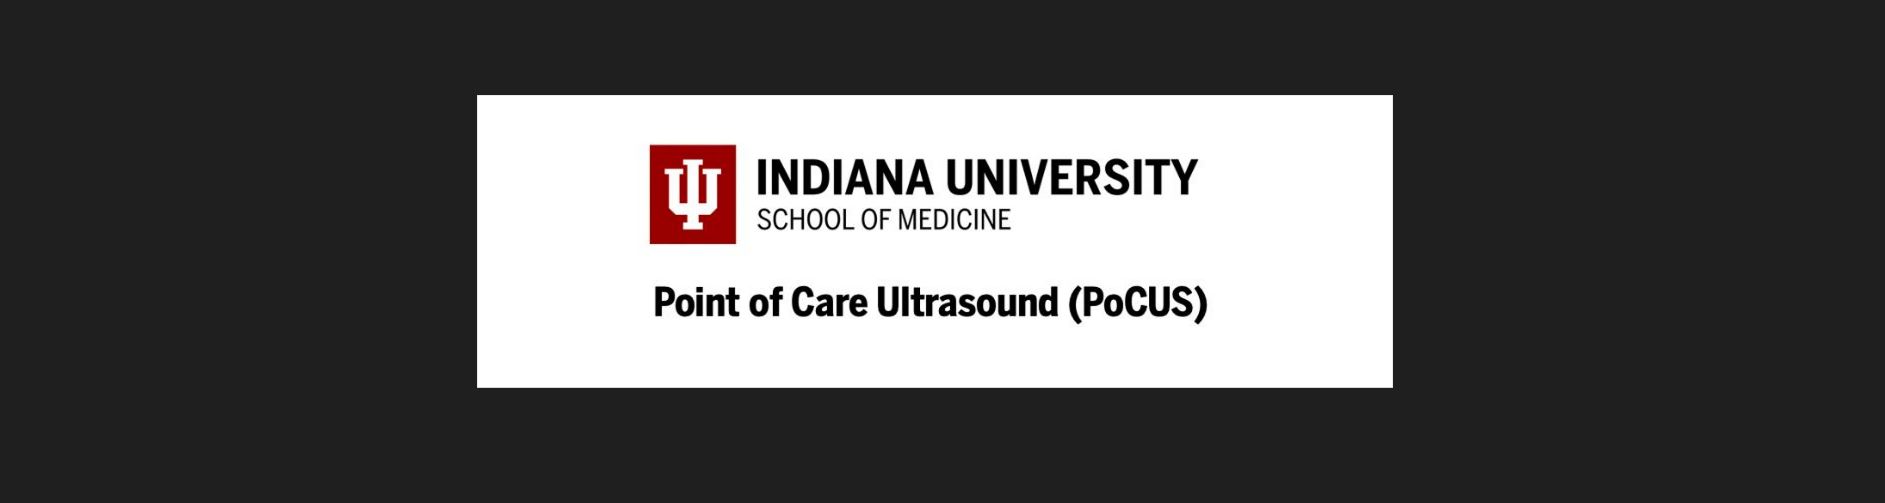 IUSM Point of Care Ultrasound Liver, Gallbladder, and Abdominal Aorta Banner